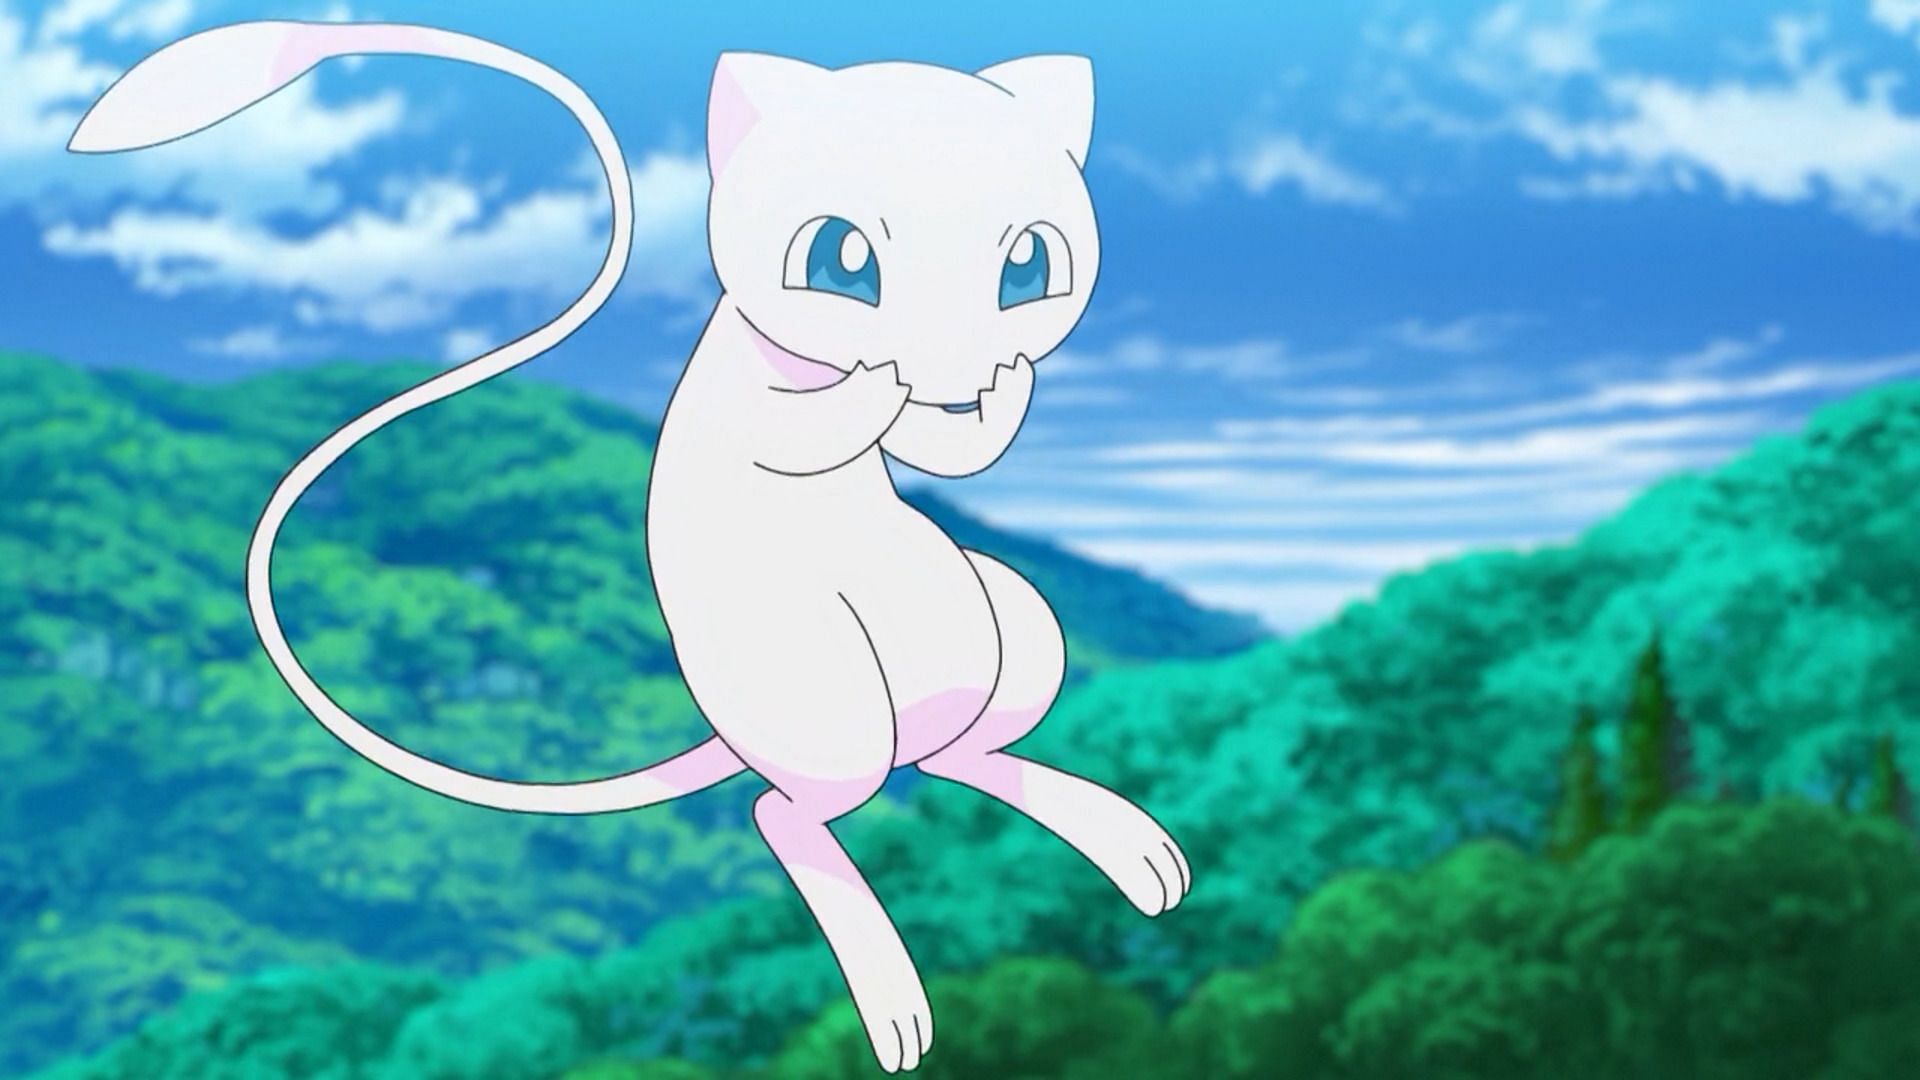 Pokemon Unite kicks off the second part of its anniversary celebrations  with Mew